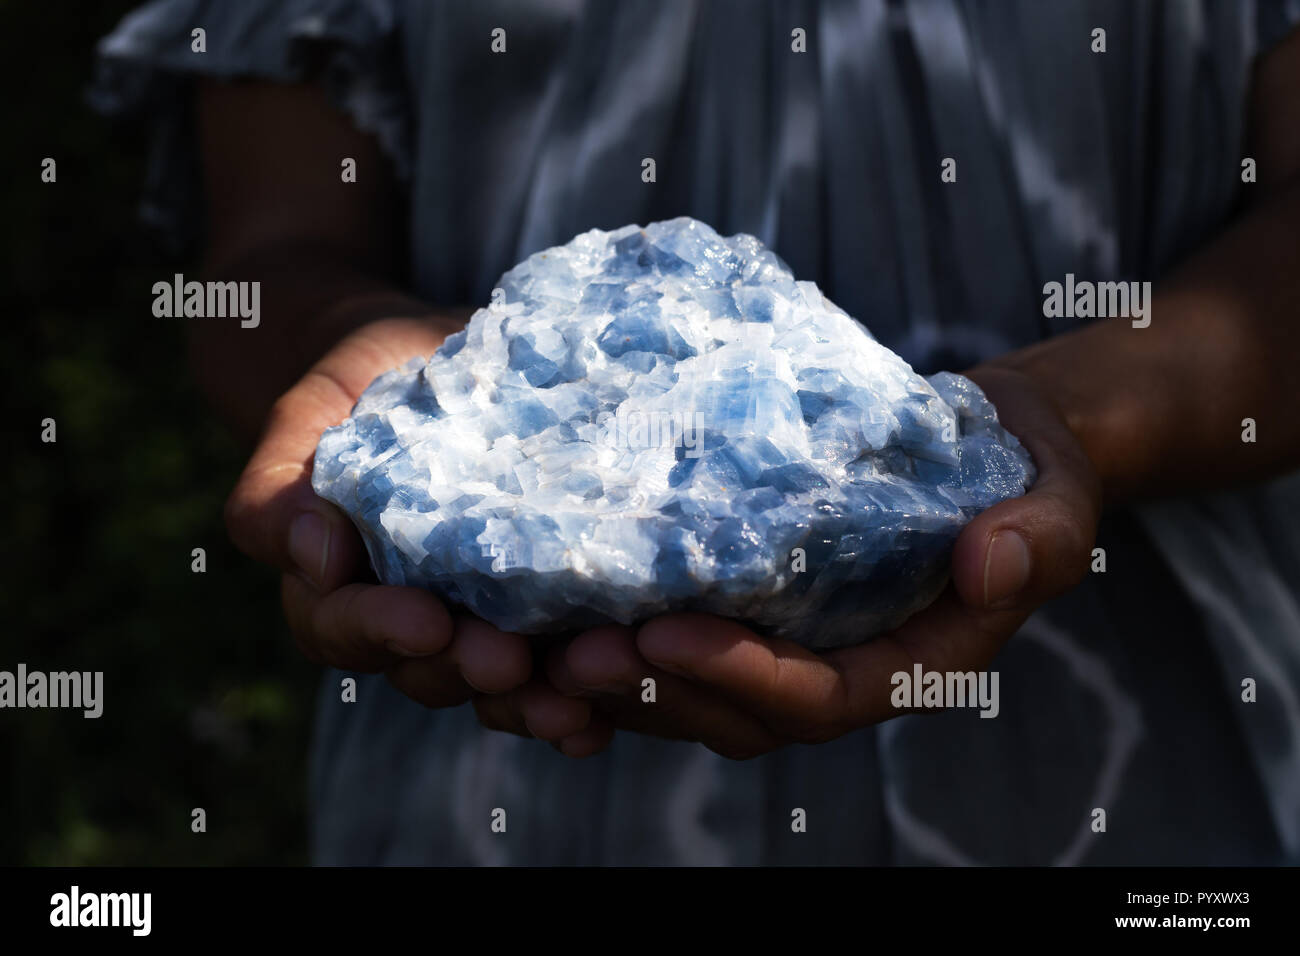 Close up of a woman holding a powerful healing blue calcite crystal in her hands in dark, moody light. Stock Photo